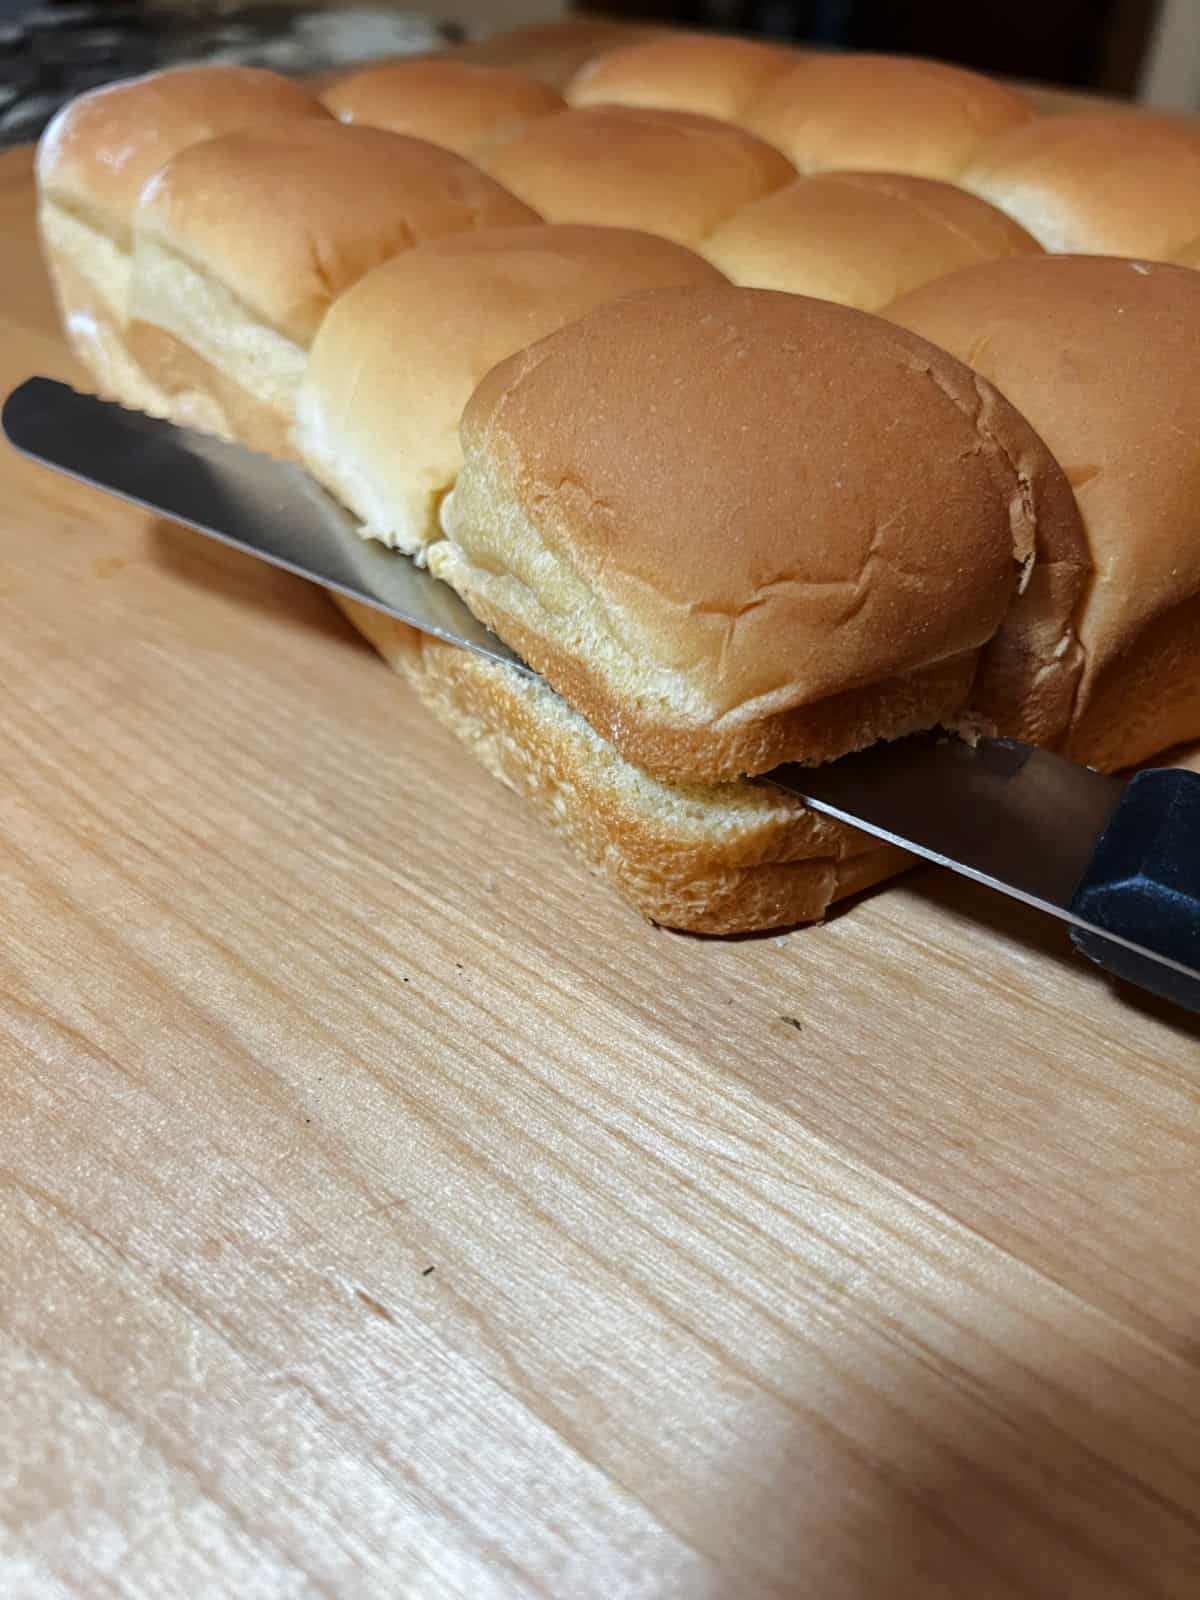 knife cutting lengthwise into the pack of dinner rolls.